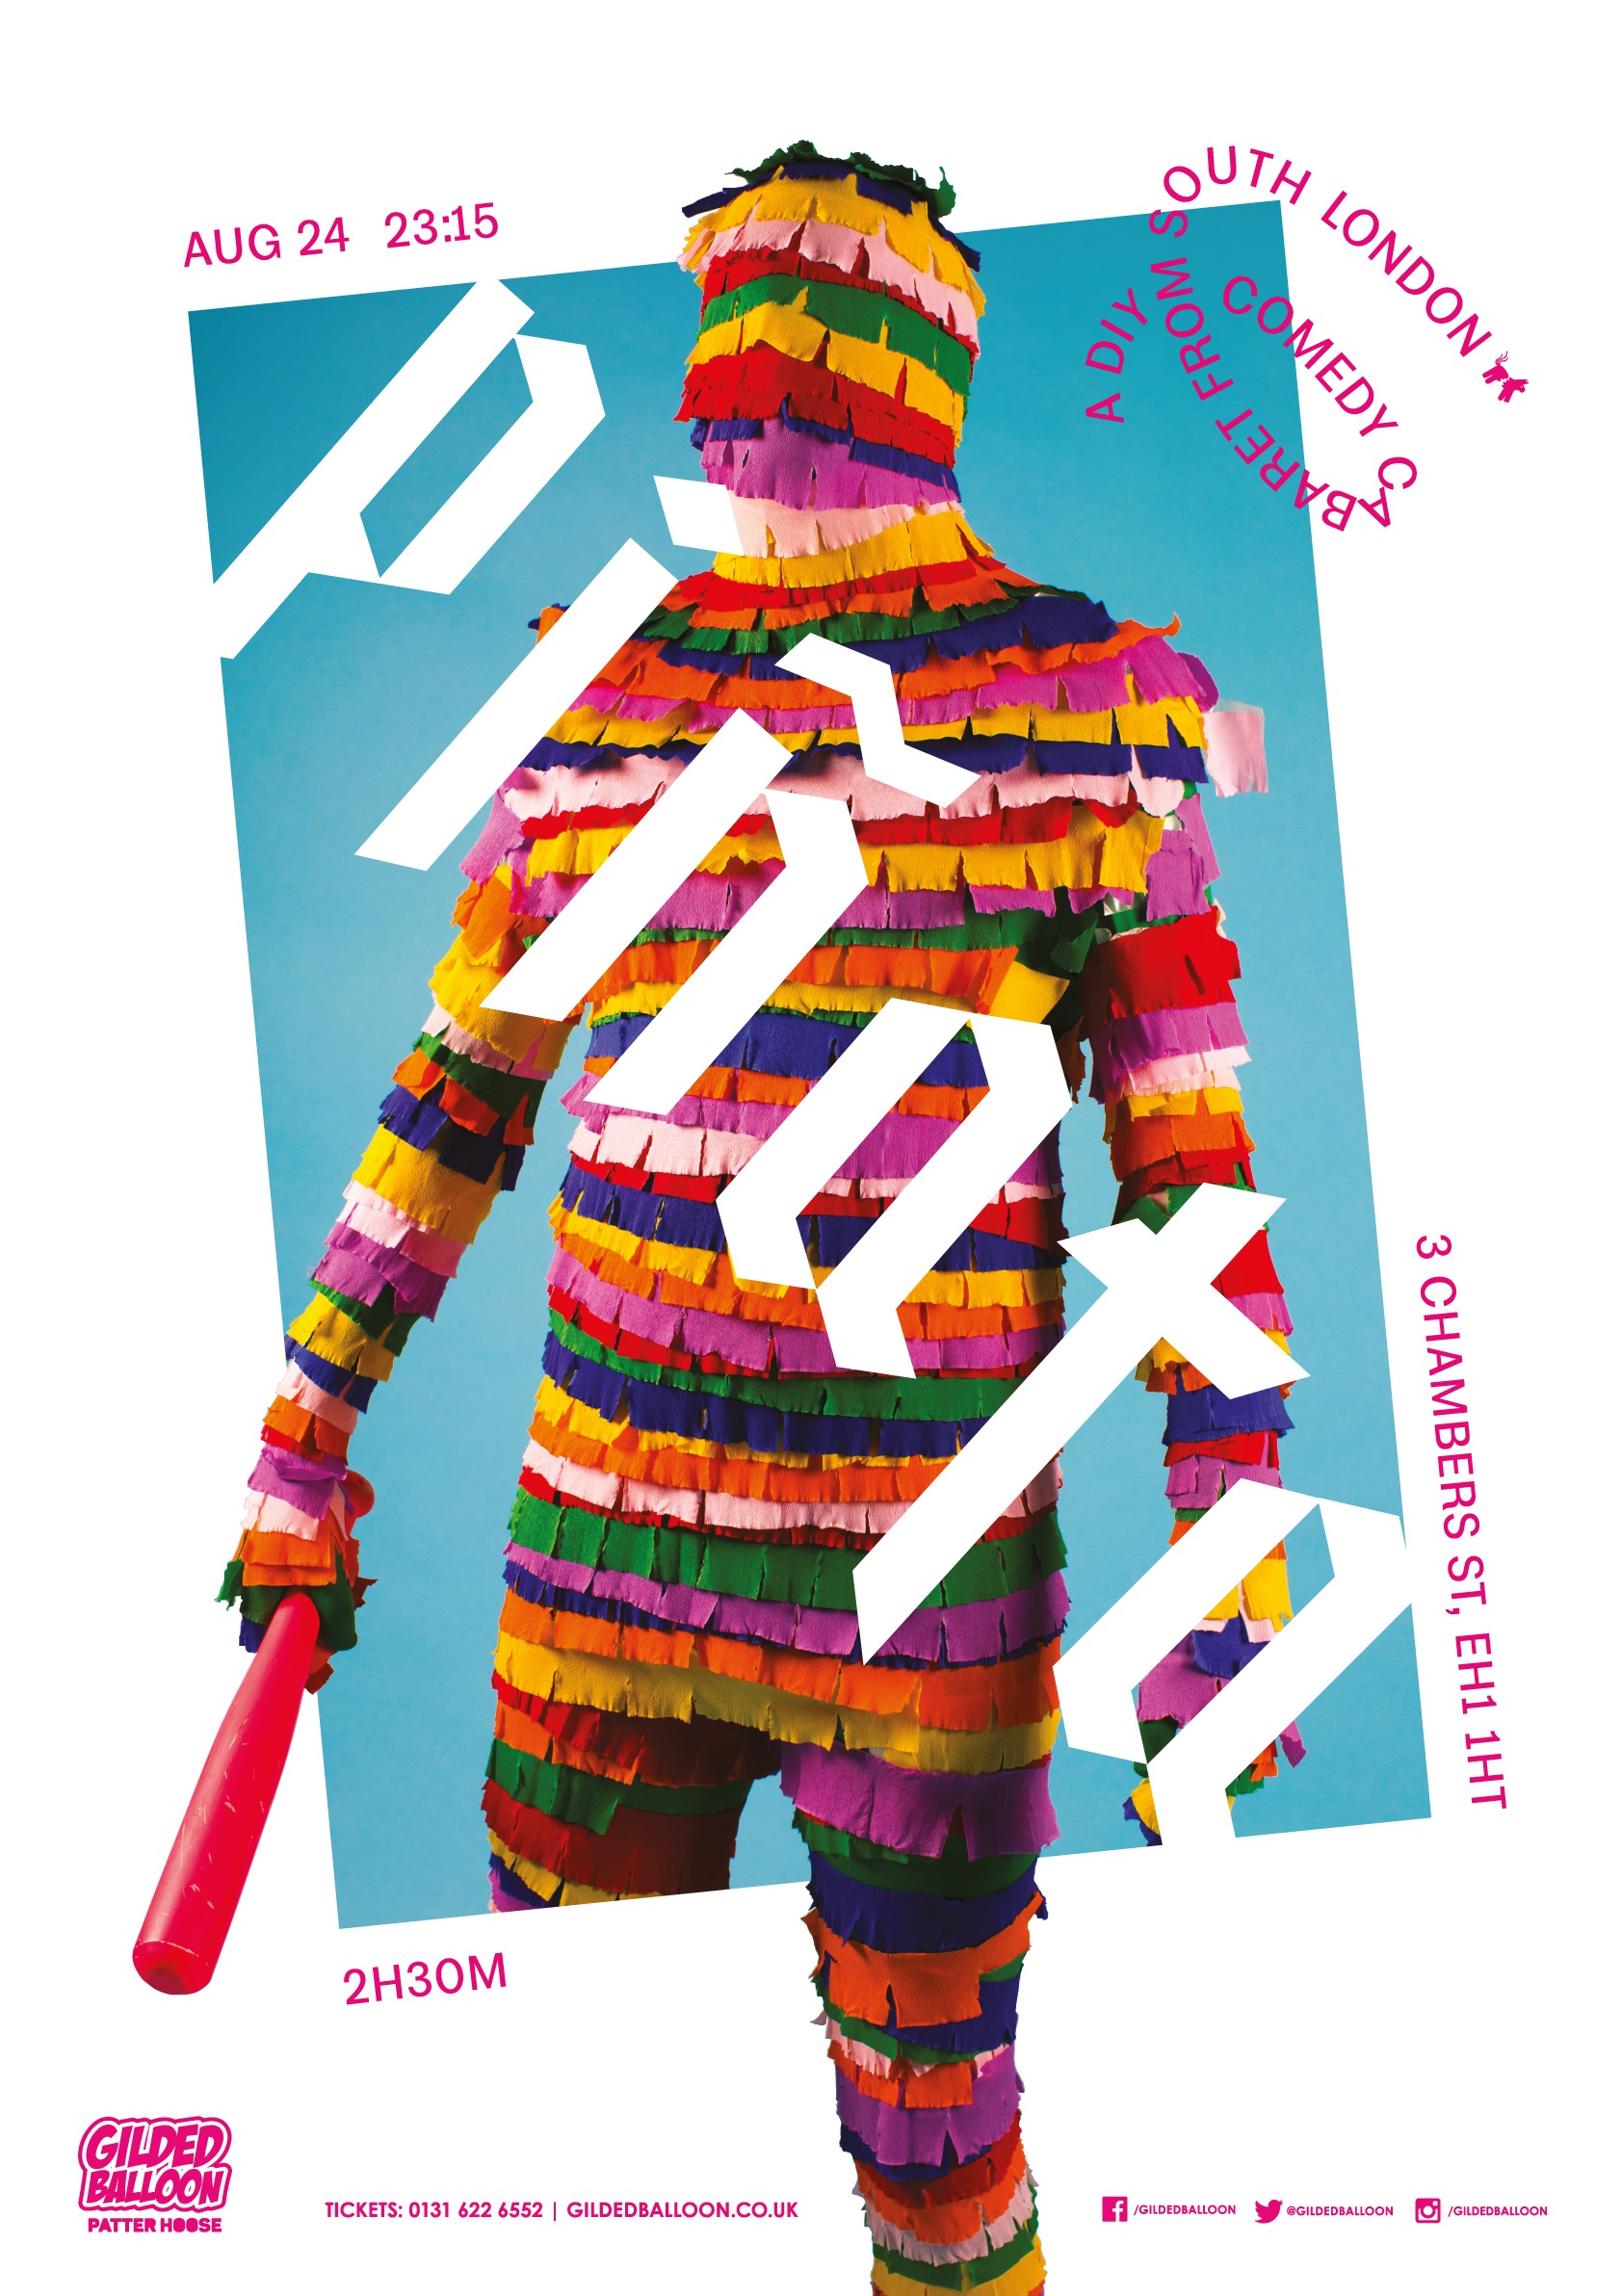 The poster for Piñata